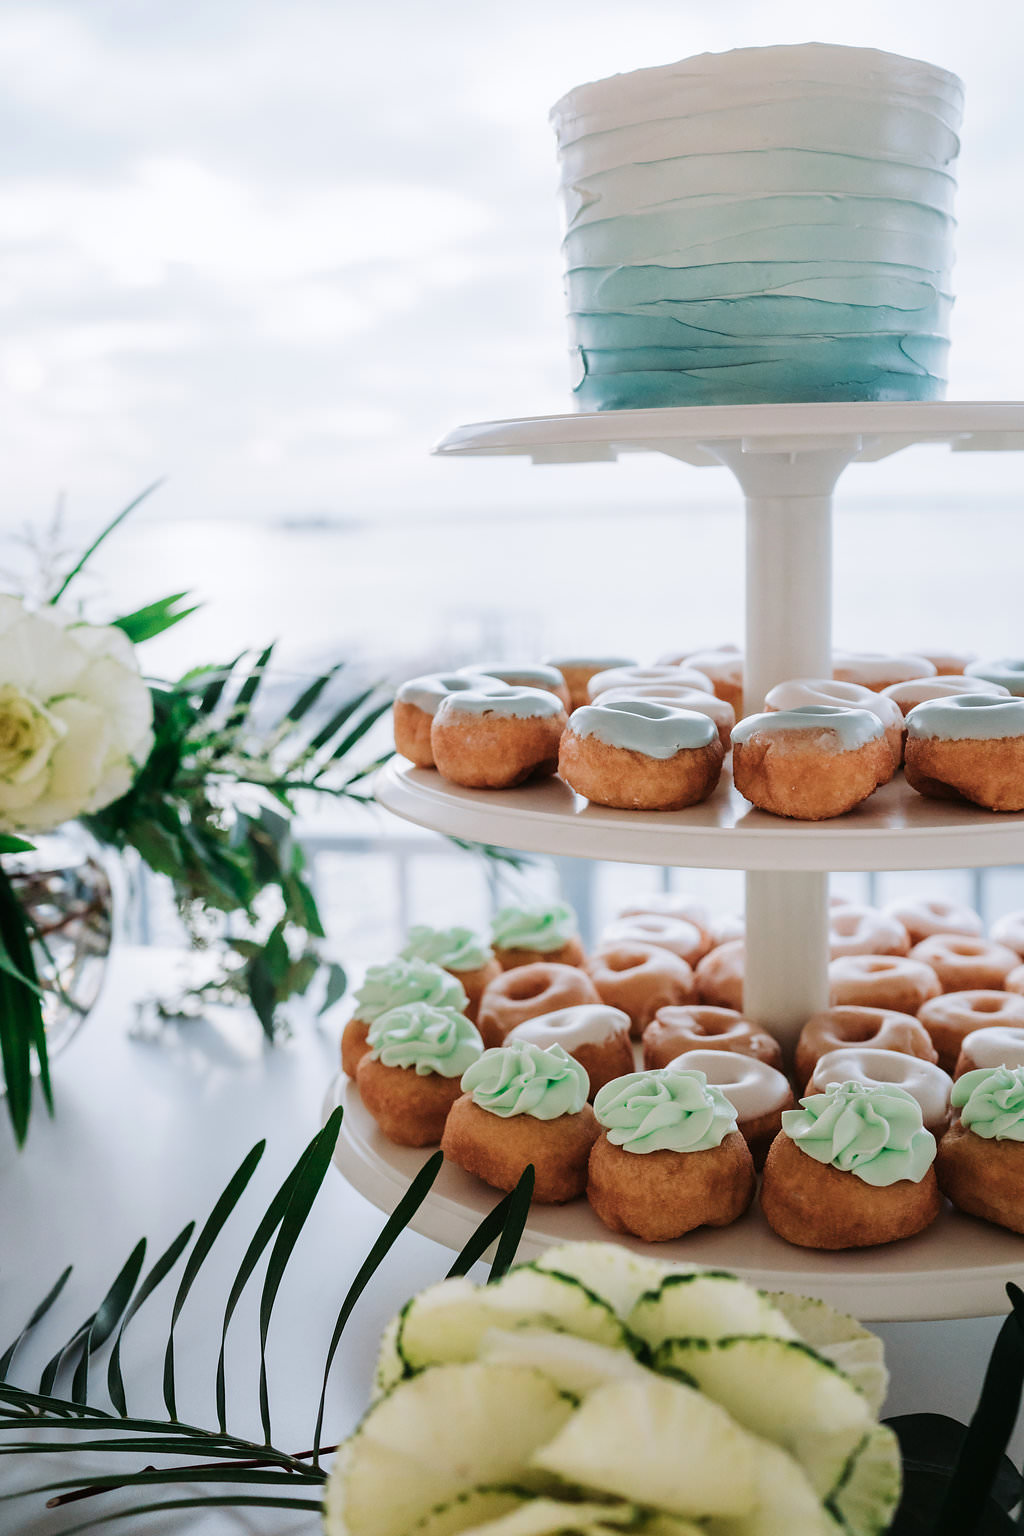 Elegant Tropical Coastal Blue and Green Wedding Reception Dessert Table with White and Blue Ombre Single Tier Round Wedding Cake and Light Blue and Seafoam Green Frosted Mini Doughnuts on Three Tiered White Cake Stand, with Natural Coastal Greenery and Blush Rose Flower Arrangements in Low Round Glass Vases | Tampa Bay Wedding Cake Bakery The Artistic Whisk